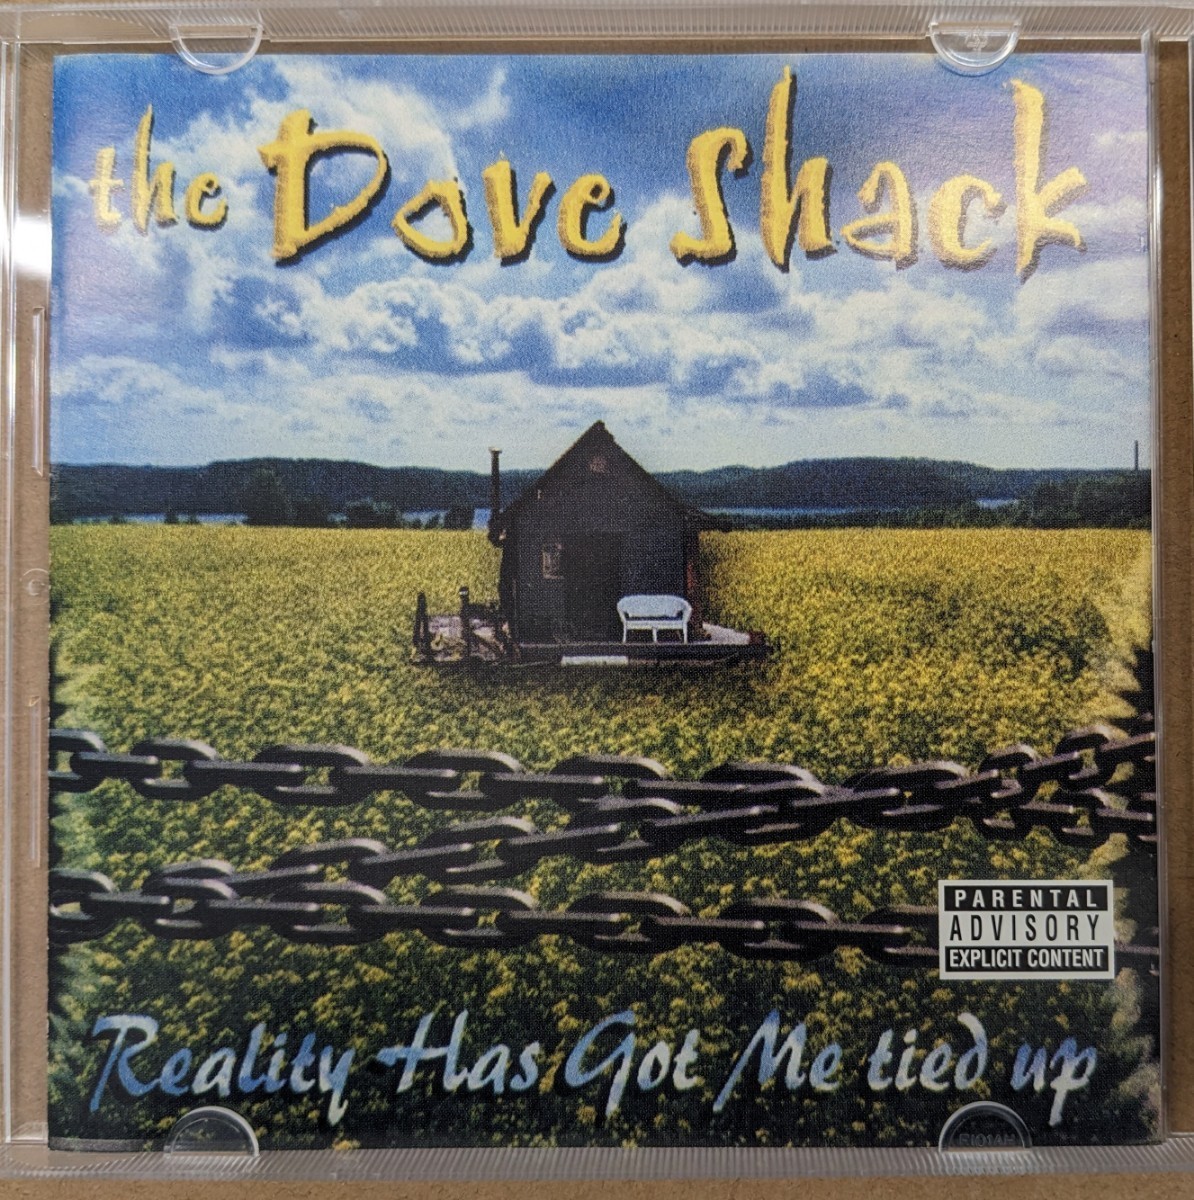 CD 日本盤 the Dove shack Reality has got me tied up 2000 street solid records g-rap g funk gangsta west coast BLCM-86075 レア盤_画像1